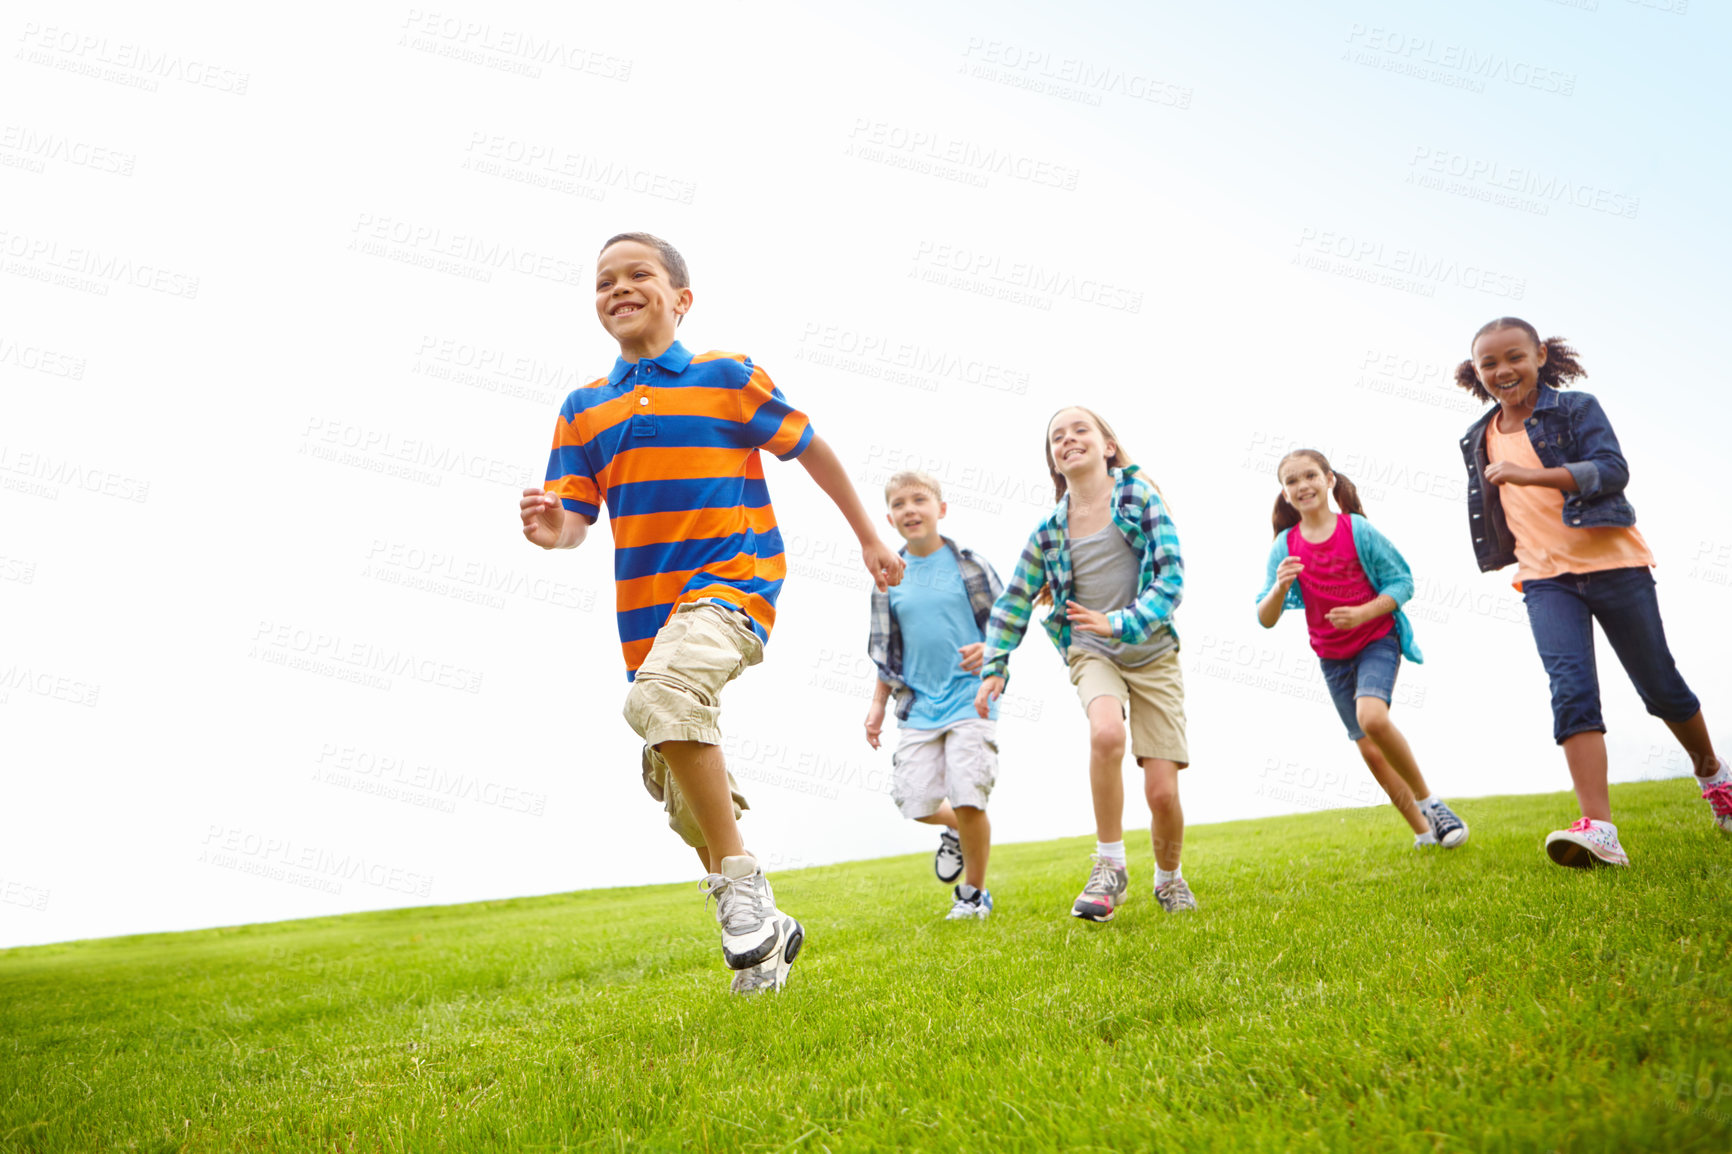 Buy stock photo Group of energetic children running through a park together